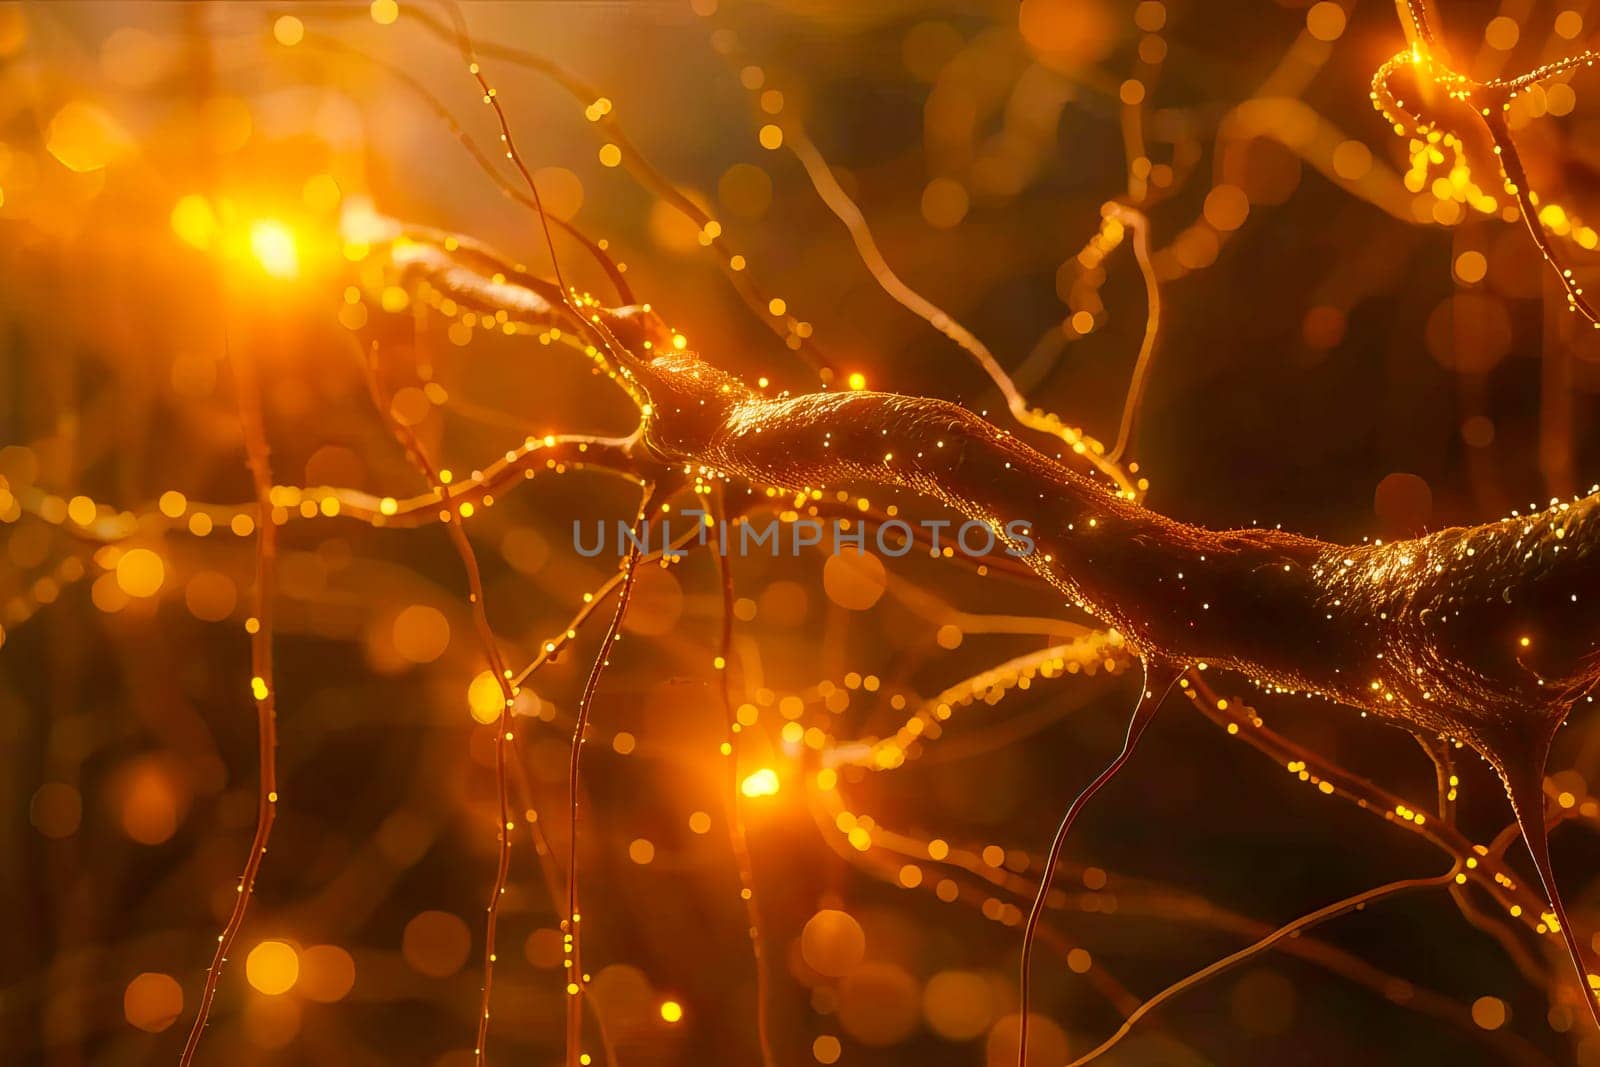 Neurons connect and fire, showcasing the complexity of brain activity by vladimka